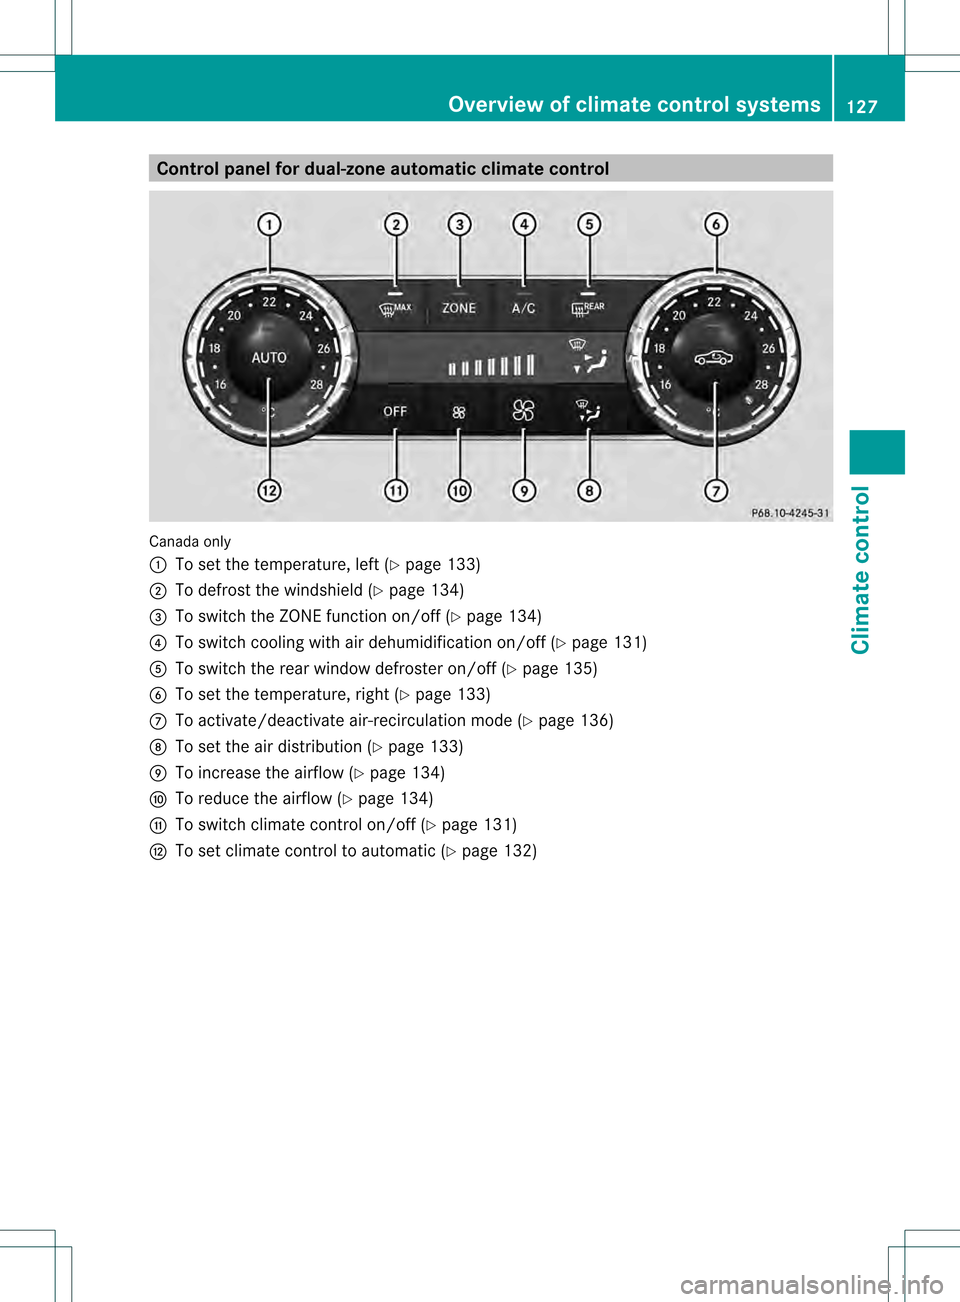 MERCEDES-BENZ C-Class SEDAN 2013 W204 Owners Manual Control panel for dual-zone automatic climate control
Canada only
0002
To set the temperature, left (Y page 133)
0003 To defros tthe windshield (Y page 134)
0022 To switch the ZONE function on/off (Y 